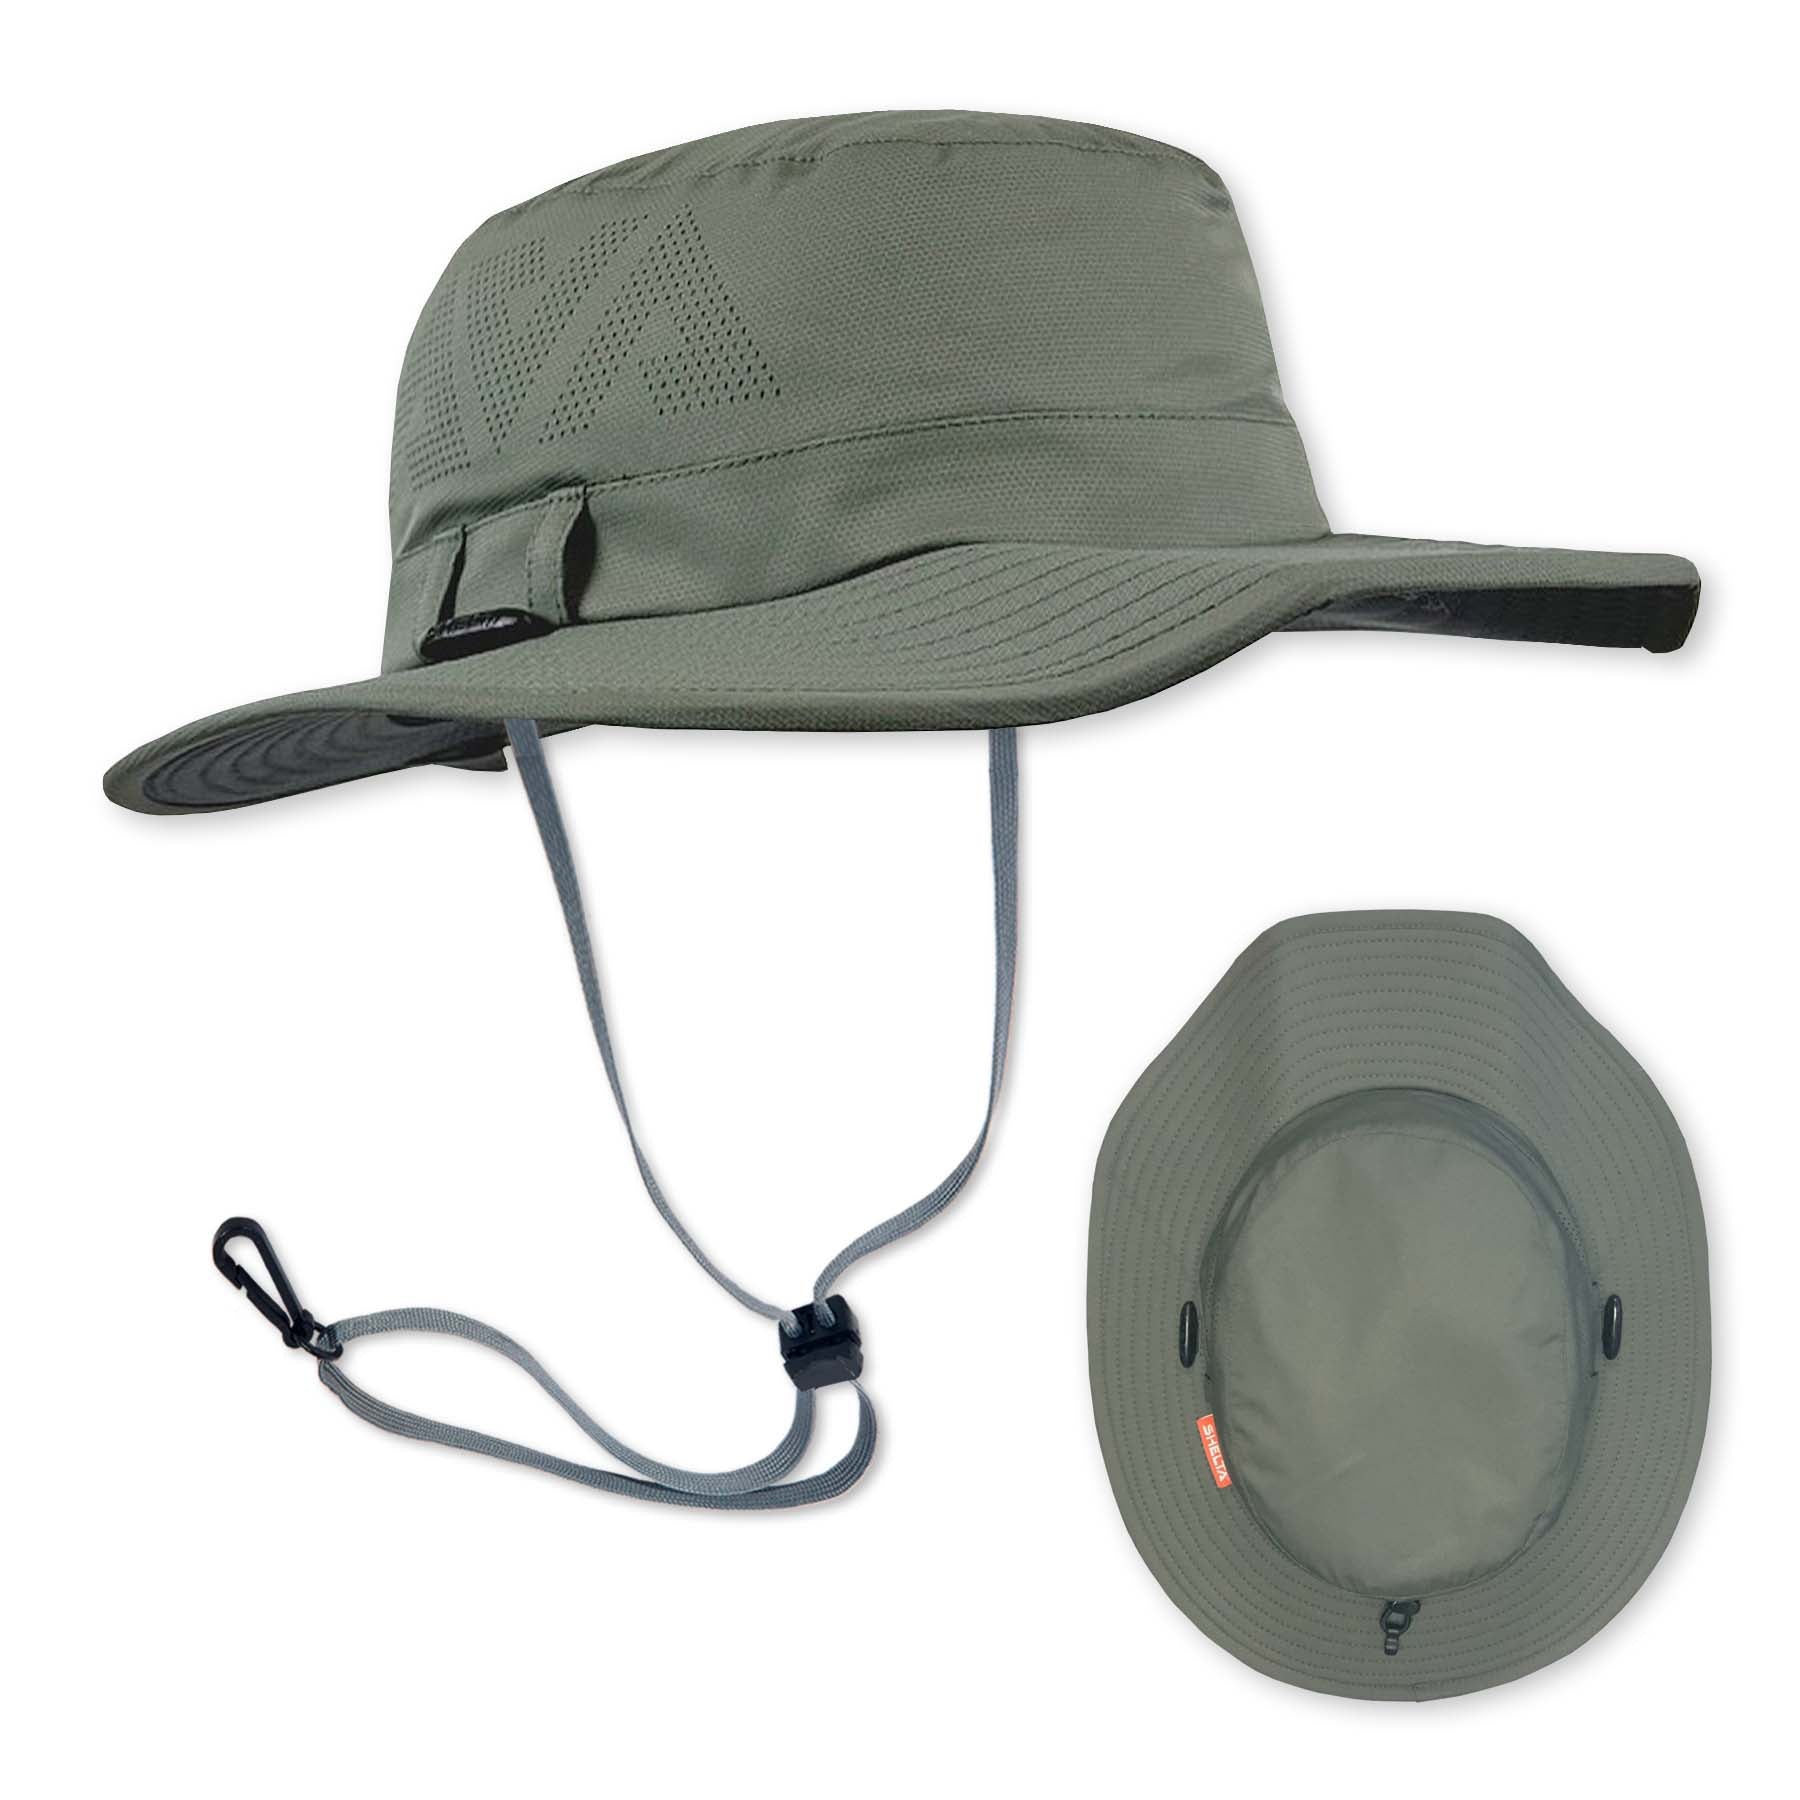 Image of the Land Hawk Sun Hat in Dirty Olive